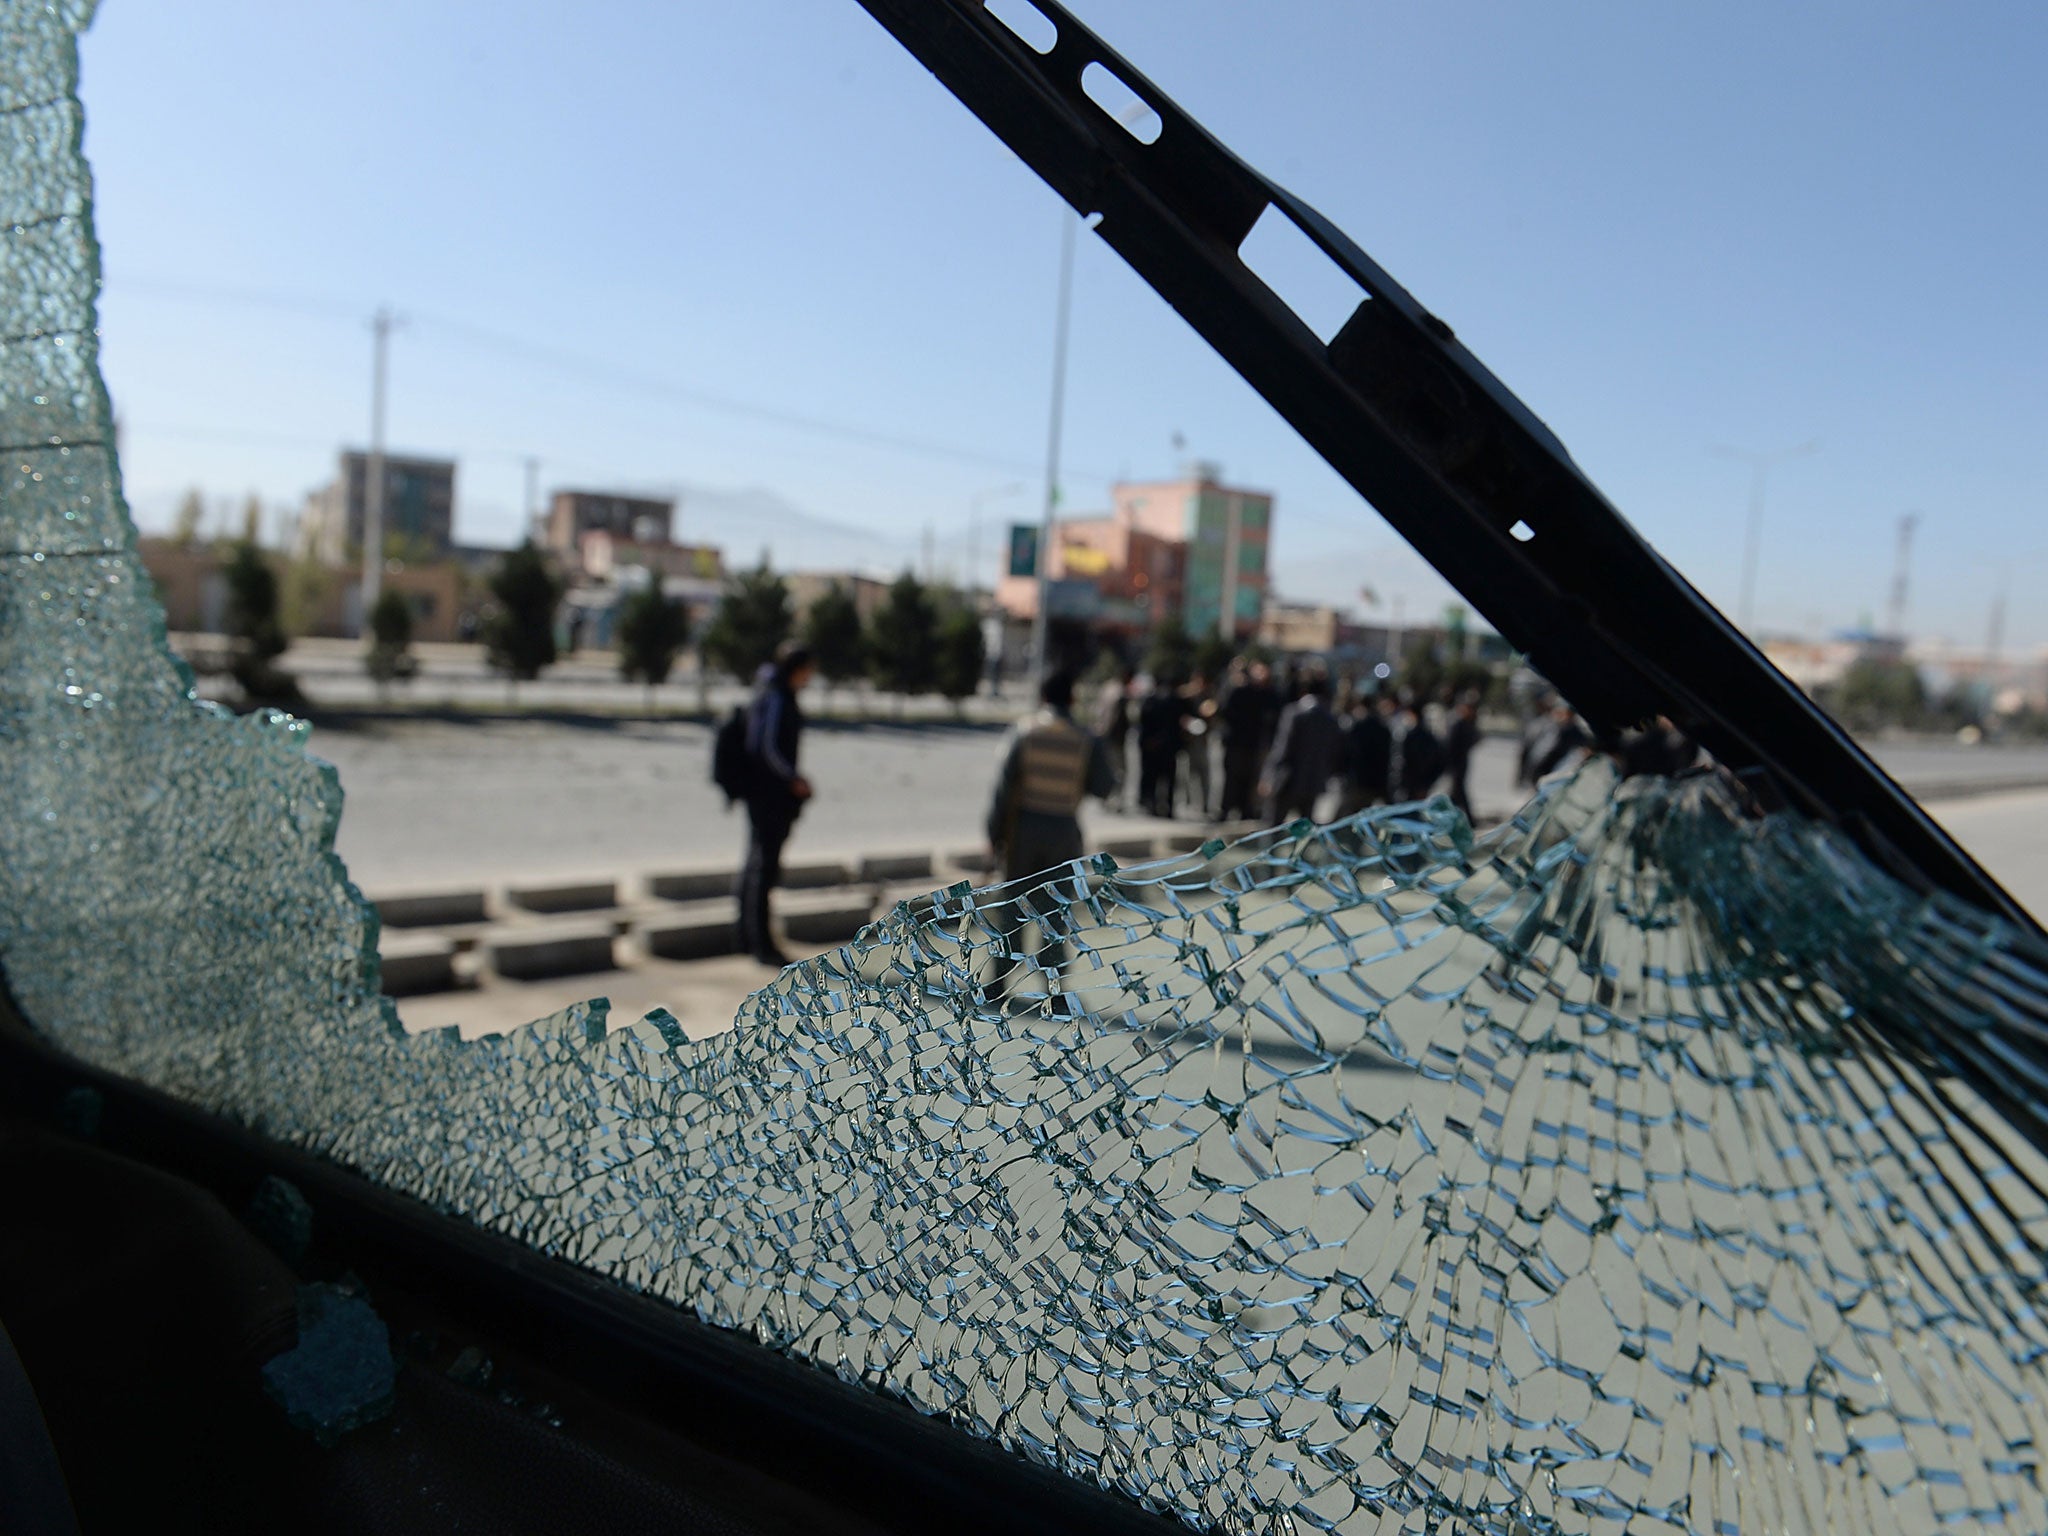 Afghan forces are seen through the shattered glass of a bus caught in a roadside bombing in Kabul. Improvised explosives are one of the main causes of civilian casualties